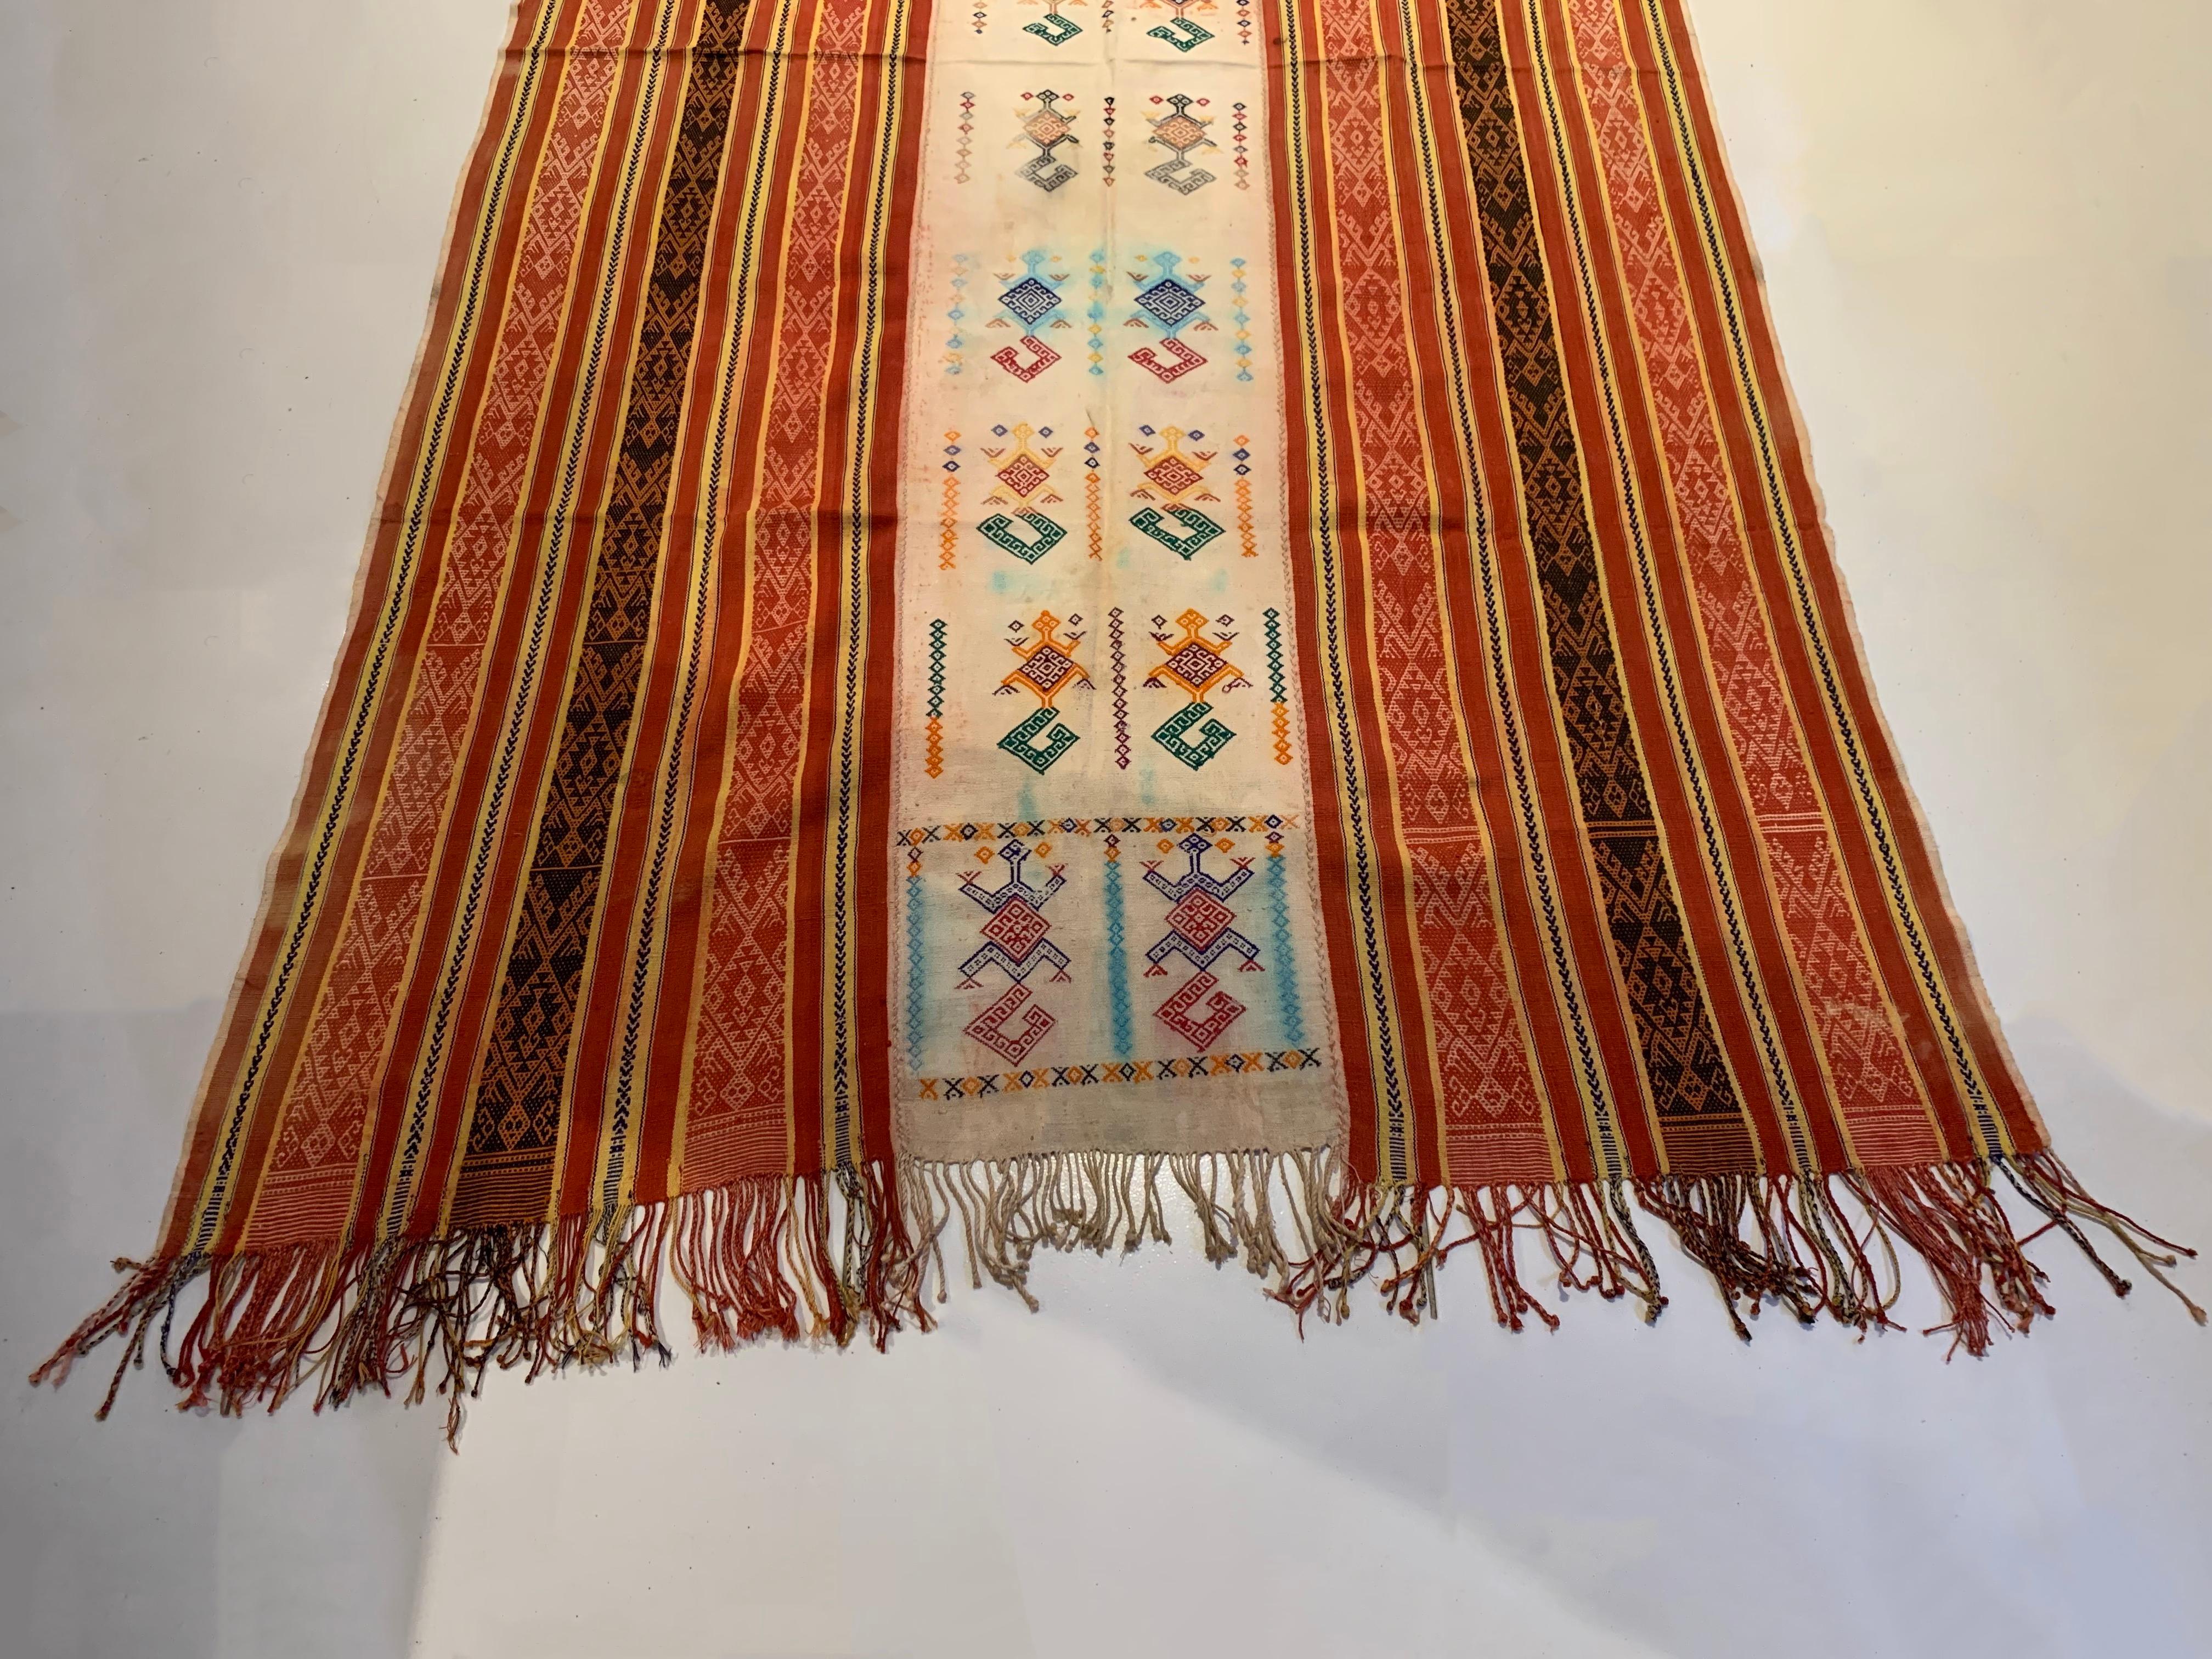 Other Ikat Textile from Timor Stunning Tribal Motifs & Colors, Indonesia c. 1950 For Sale